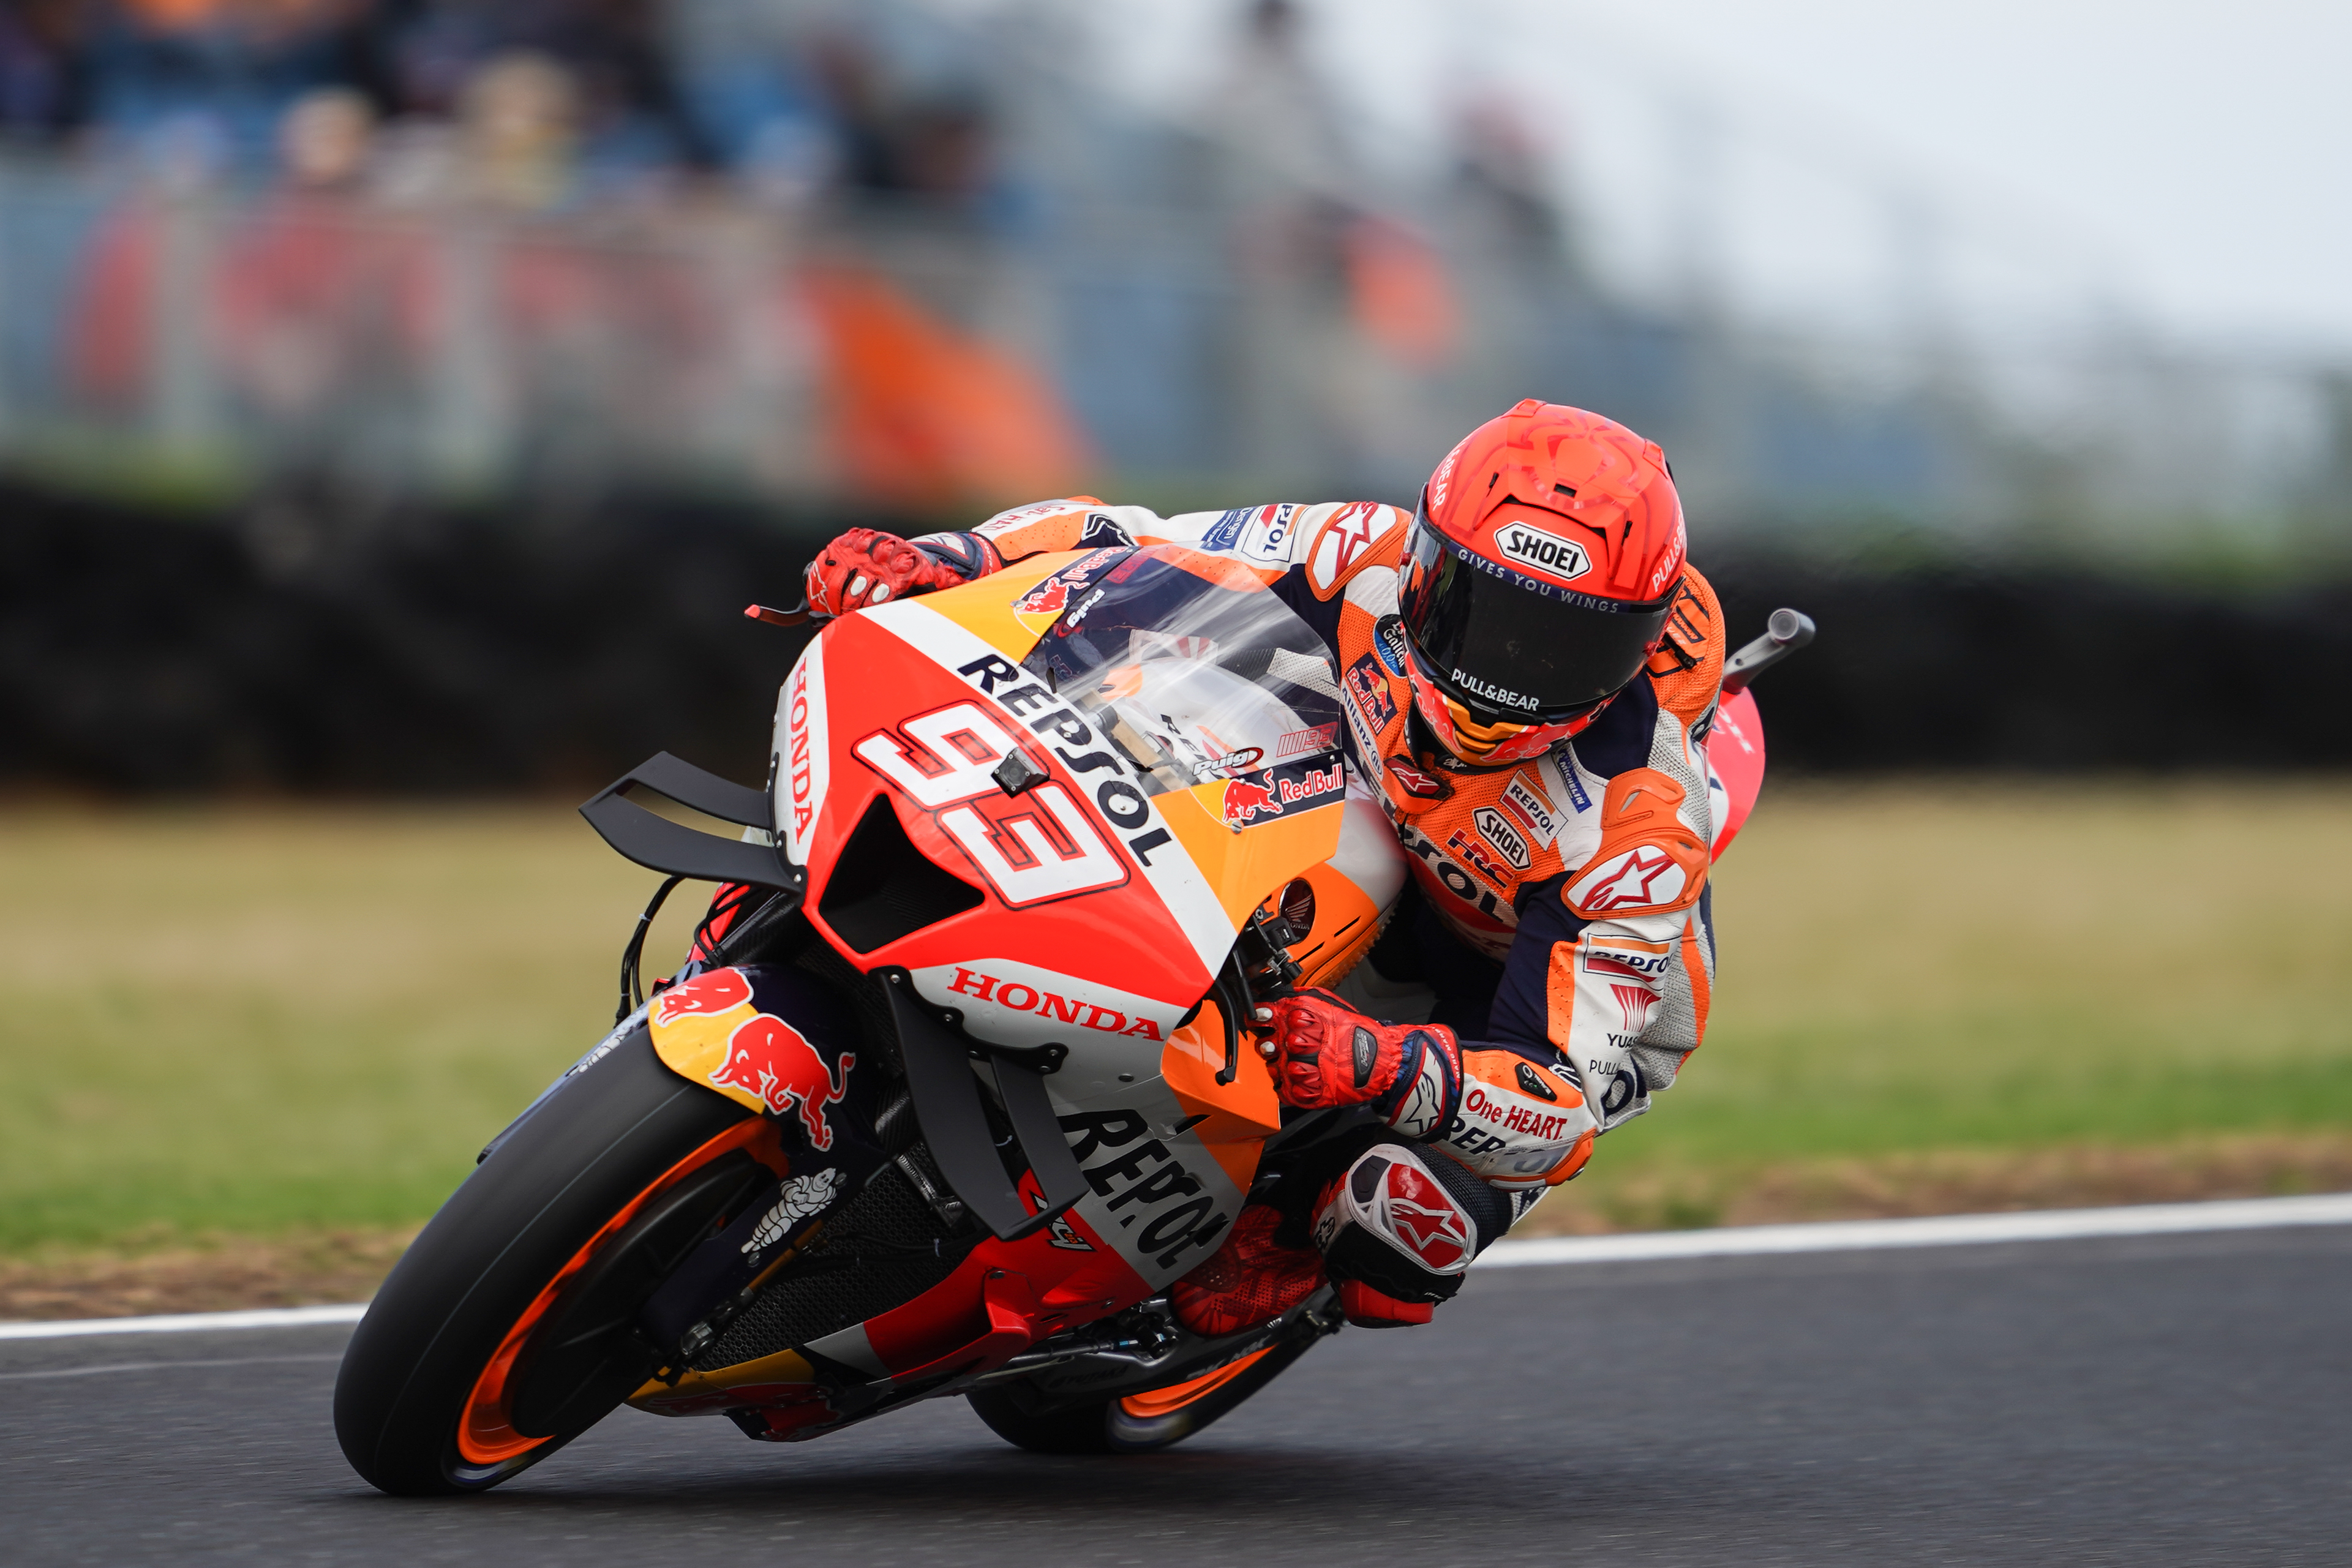 Marquez amazes again at Turn 10 on route to front row